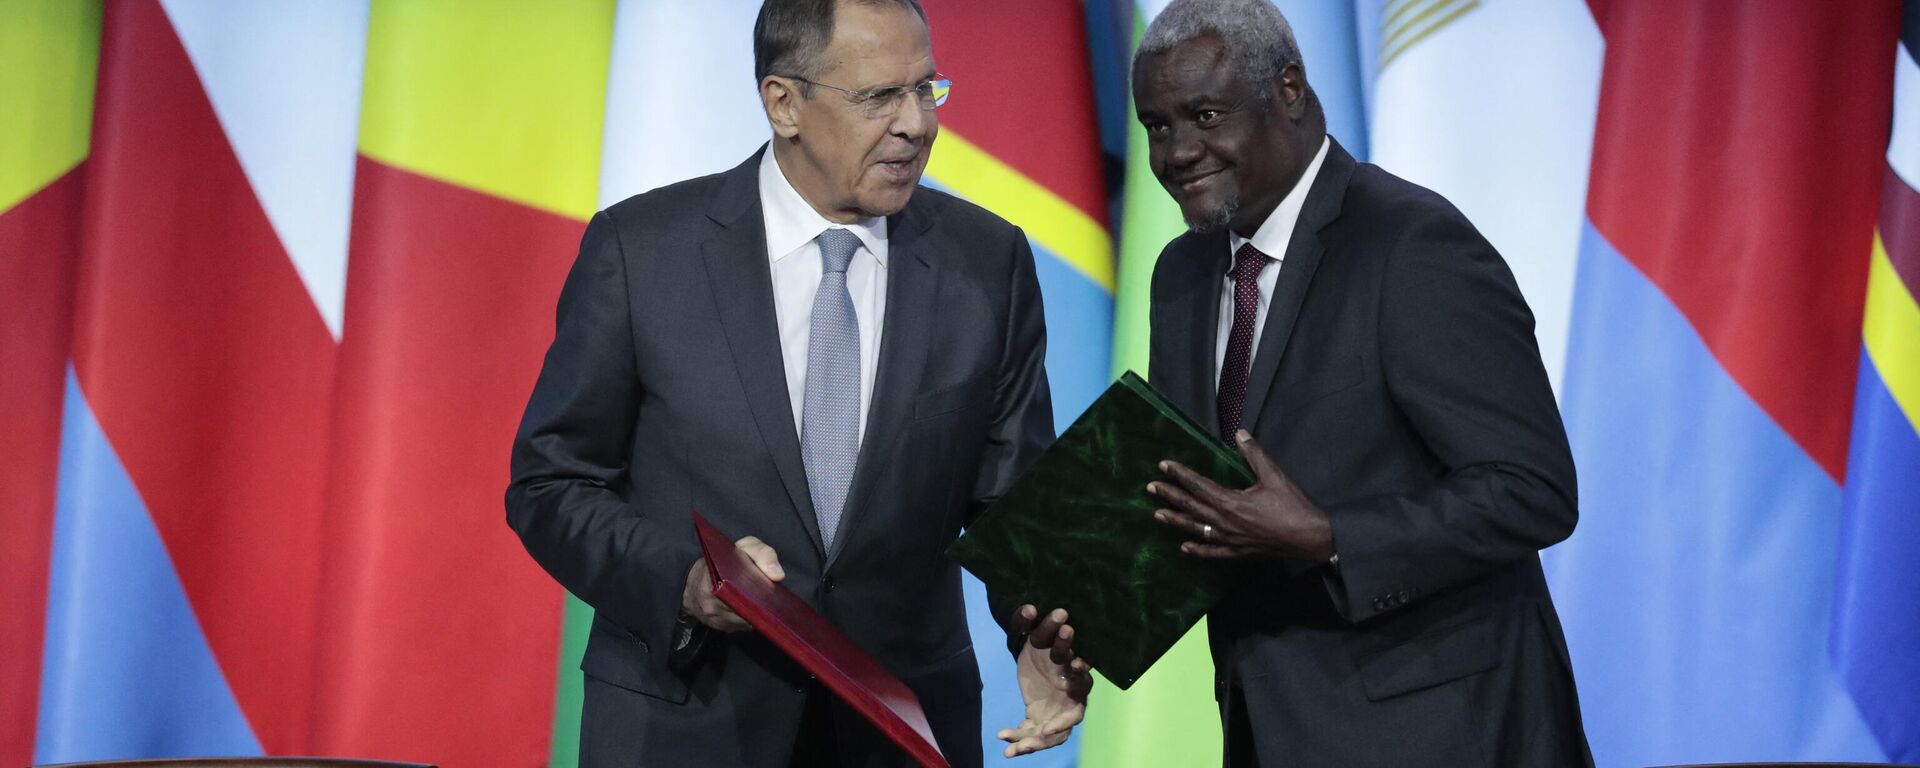 Russian Foreign Minister Sergei Lavrov (L) and Chairperson of the African Union Commission, Moussa Faki Mahamat attend a signing ceremony during the 2019 Russia-Africa Summit at the Sirius Park of Science and Art in Sochi, Russia, on October 24, 2019 - Sputnik Africa, 1920, 23.07.2023